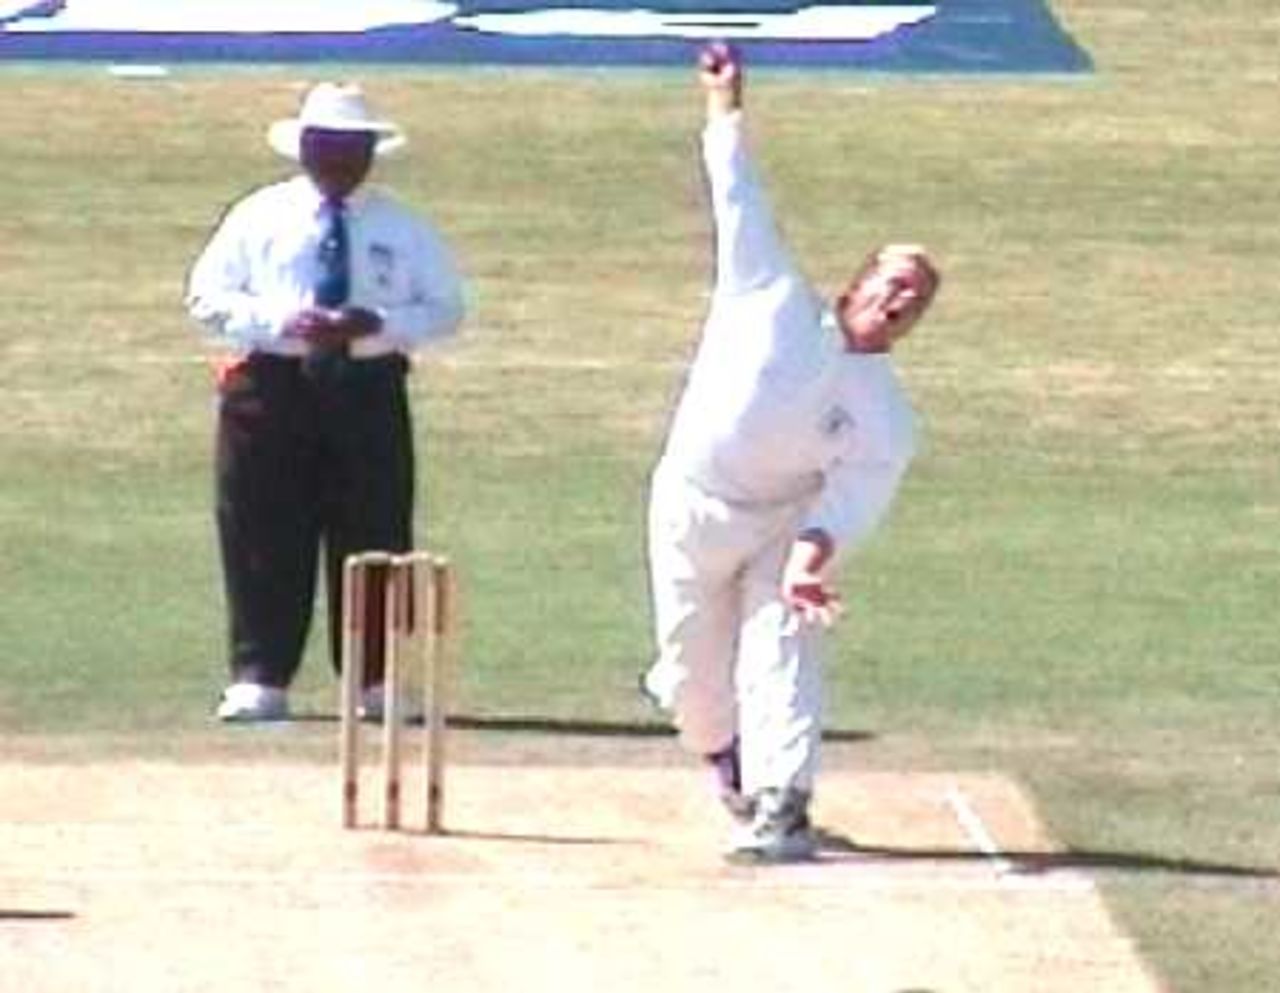 Netherlands opening bowler, SF Gokke, in the ICCT 2001 Final